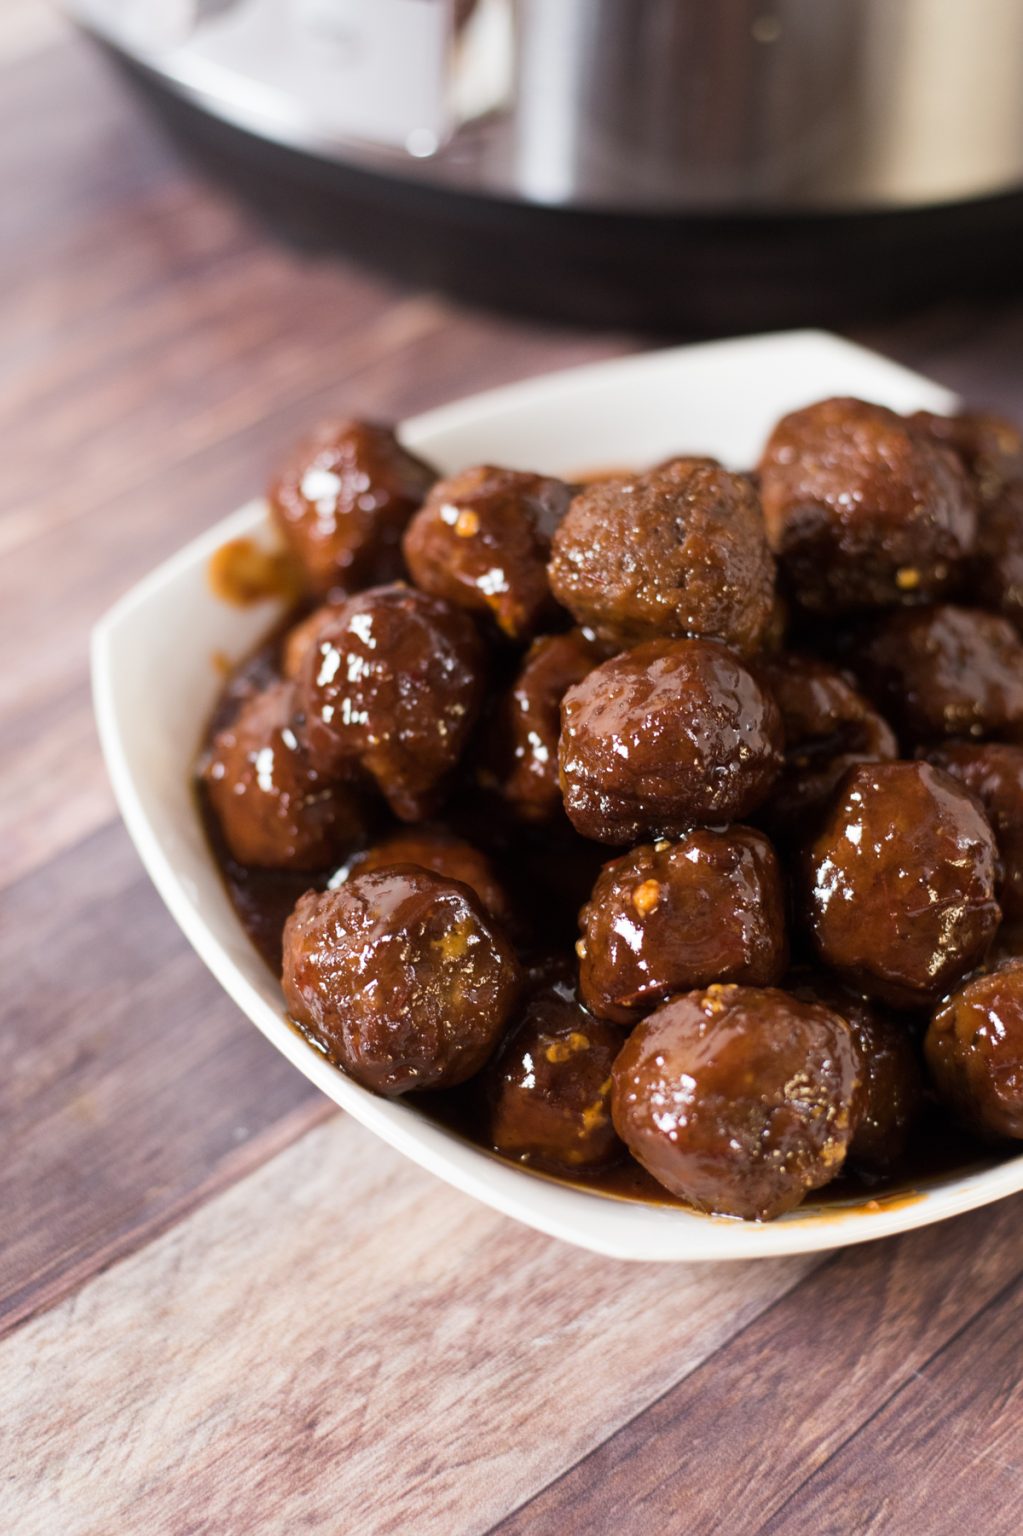 Sweet Instant Pot Meatballs with Jelly and Chili Sauce